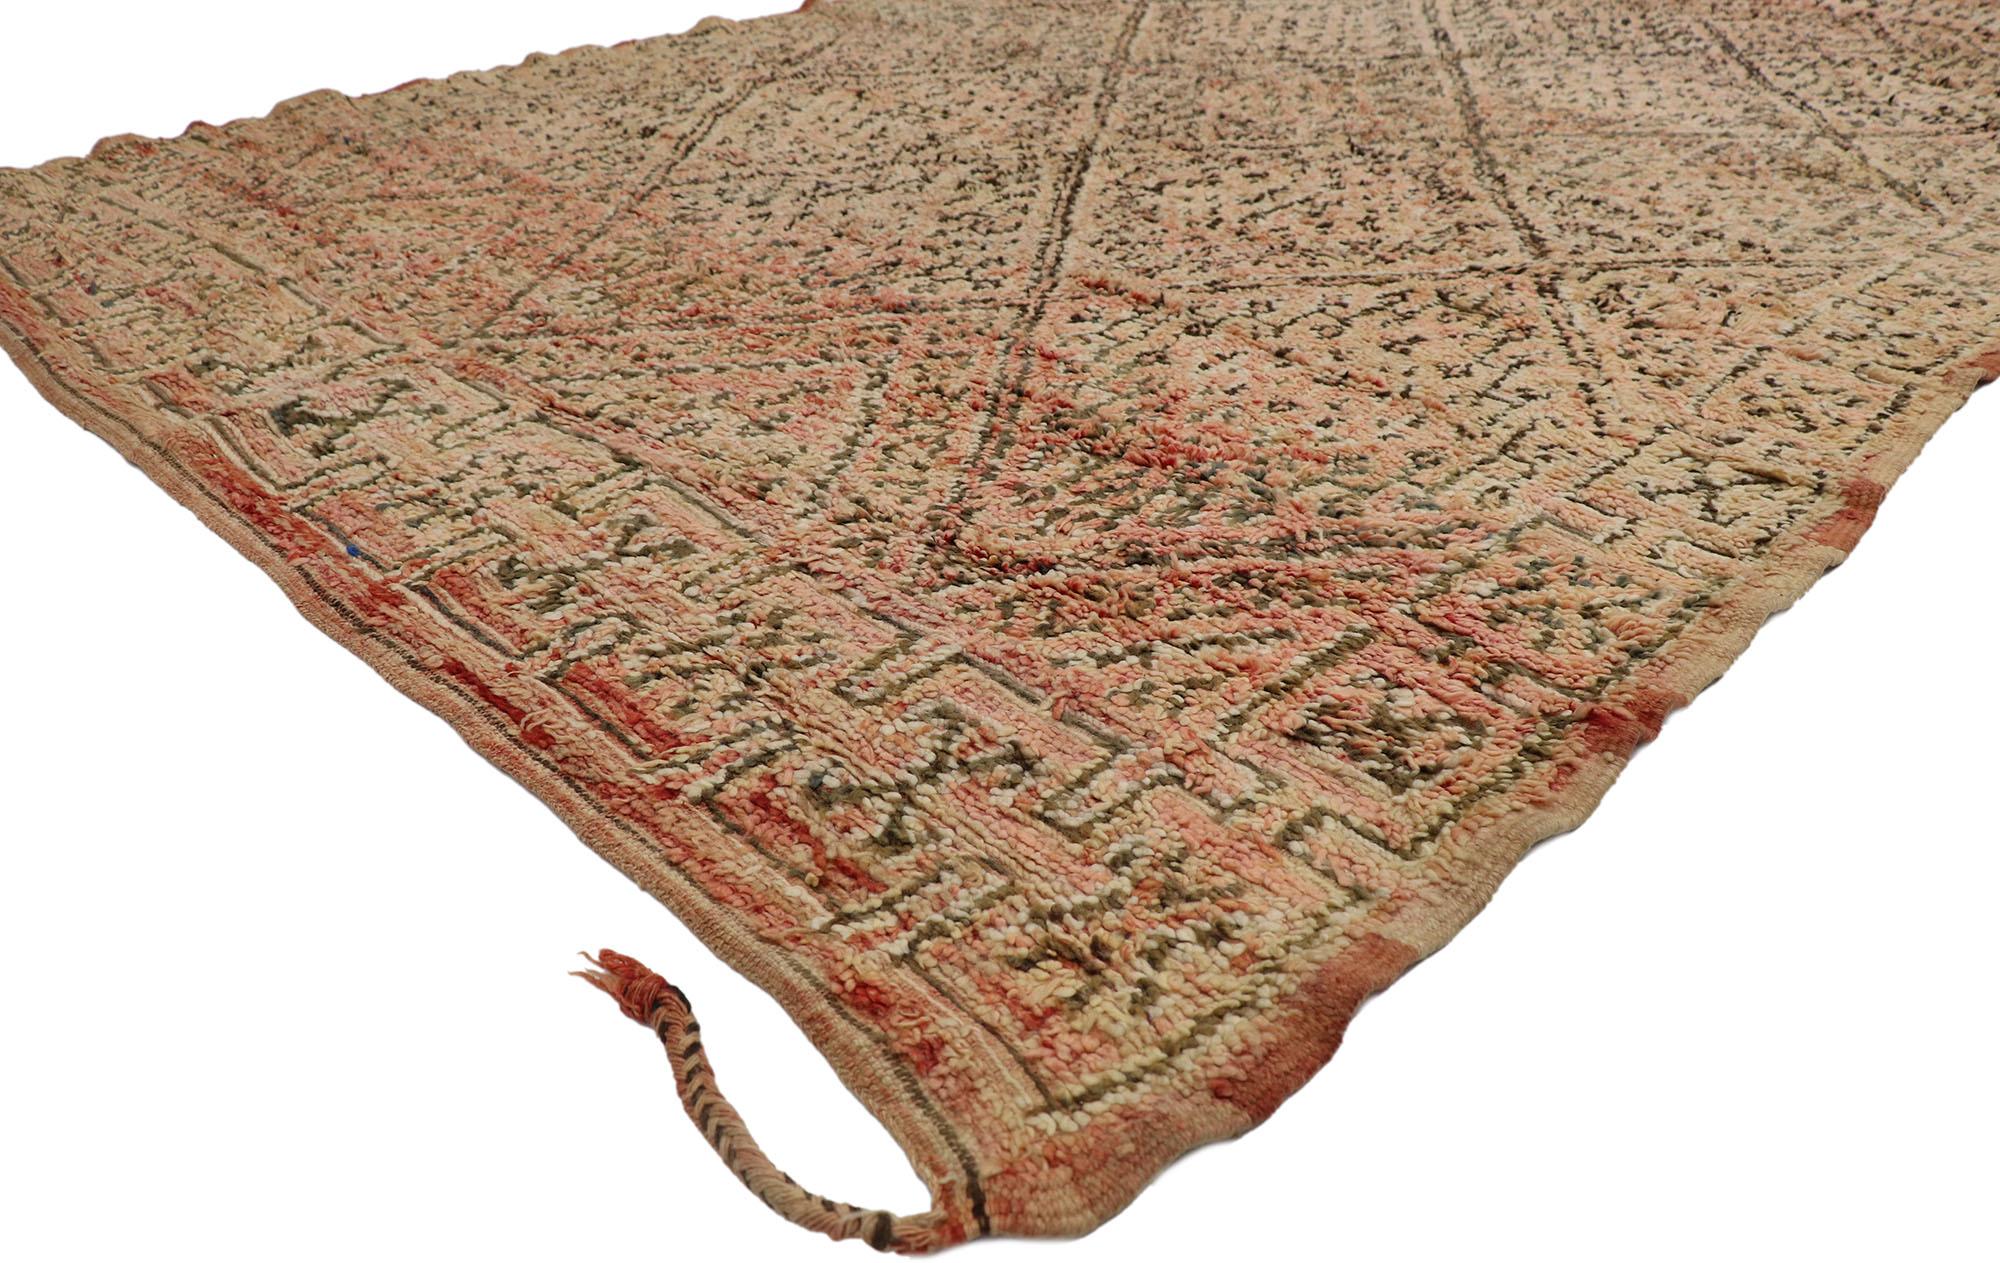 21335 Vintage Zayane Moroccan rug, 06'11 x 10'07. ?Emanating nomadic charm with incredible detail and texture, this hand knotted wool vintage Moroccan rug is a captivating vision of woven beauty. The eye-catching lozenge lattice and soft eathy